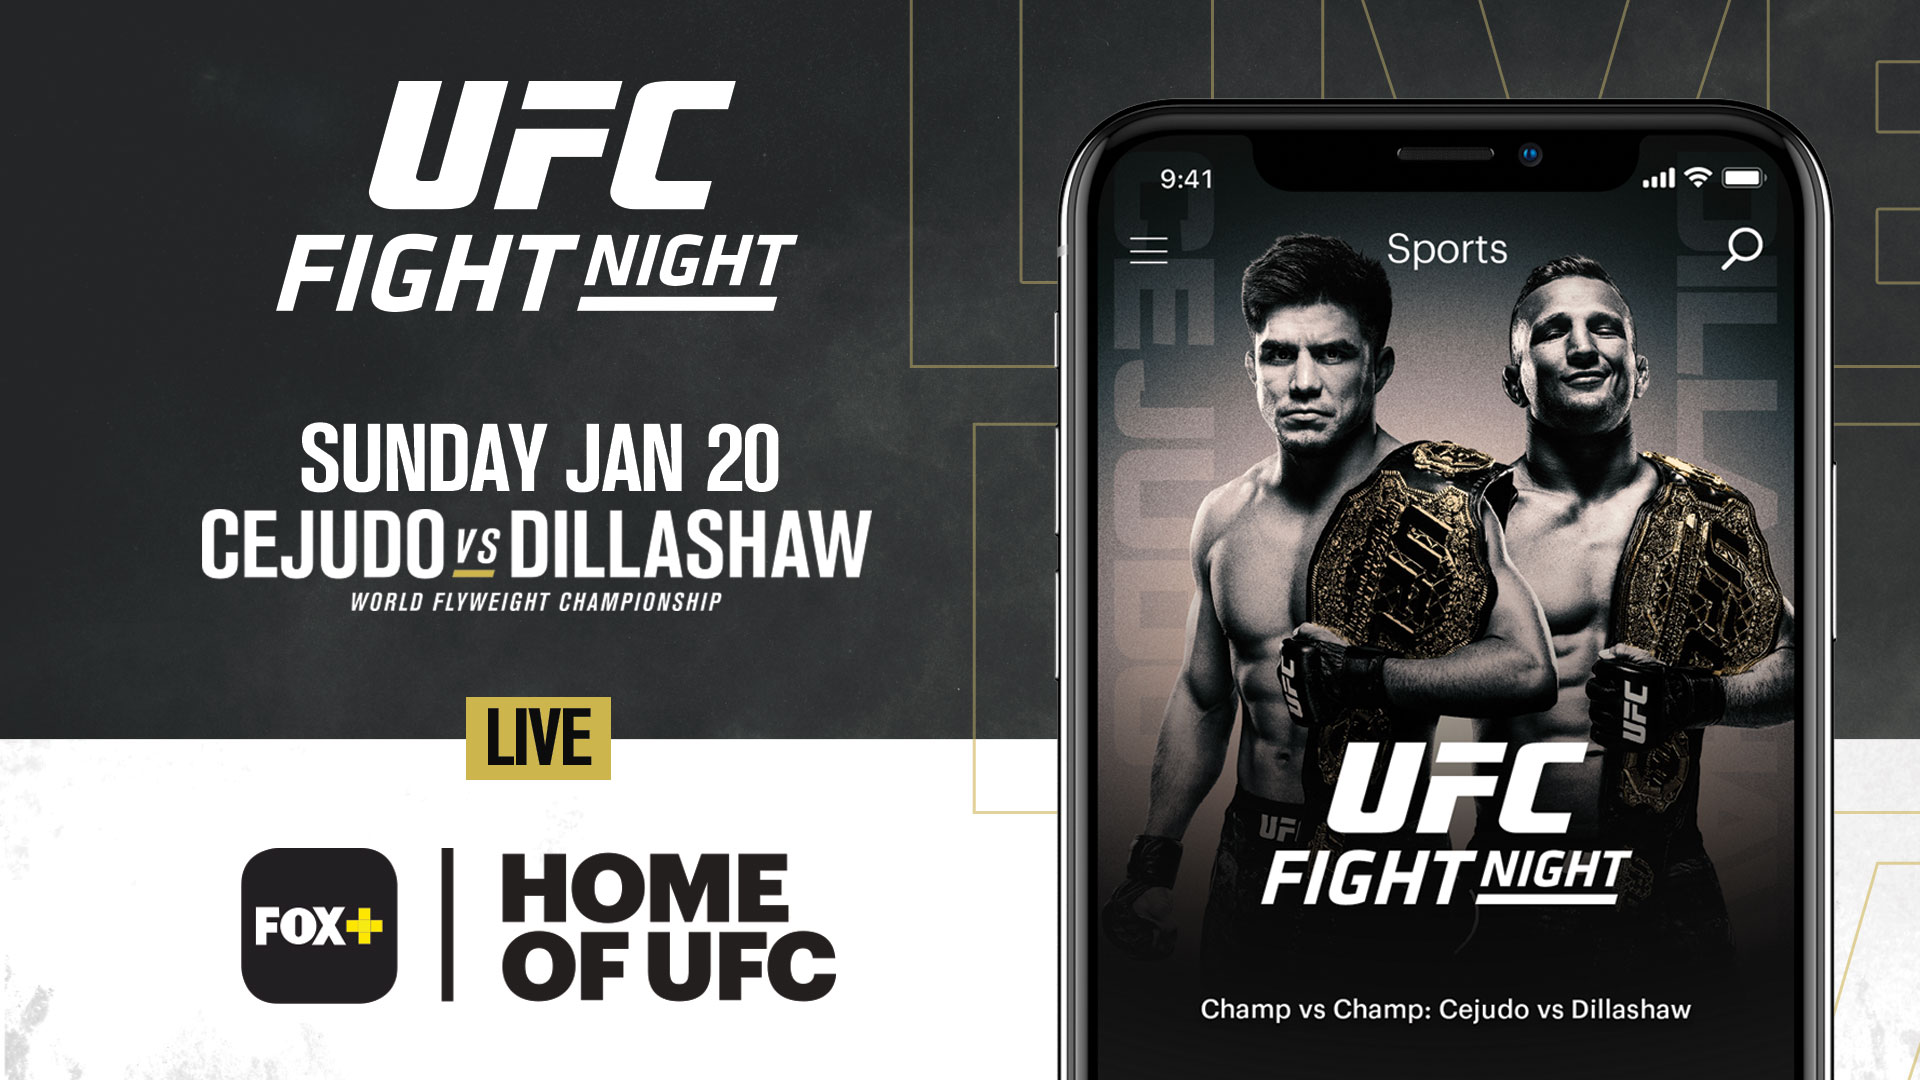 Fox+ is now home of UFC in the Philippines